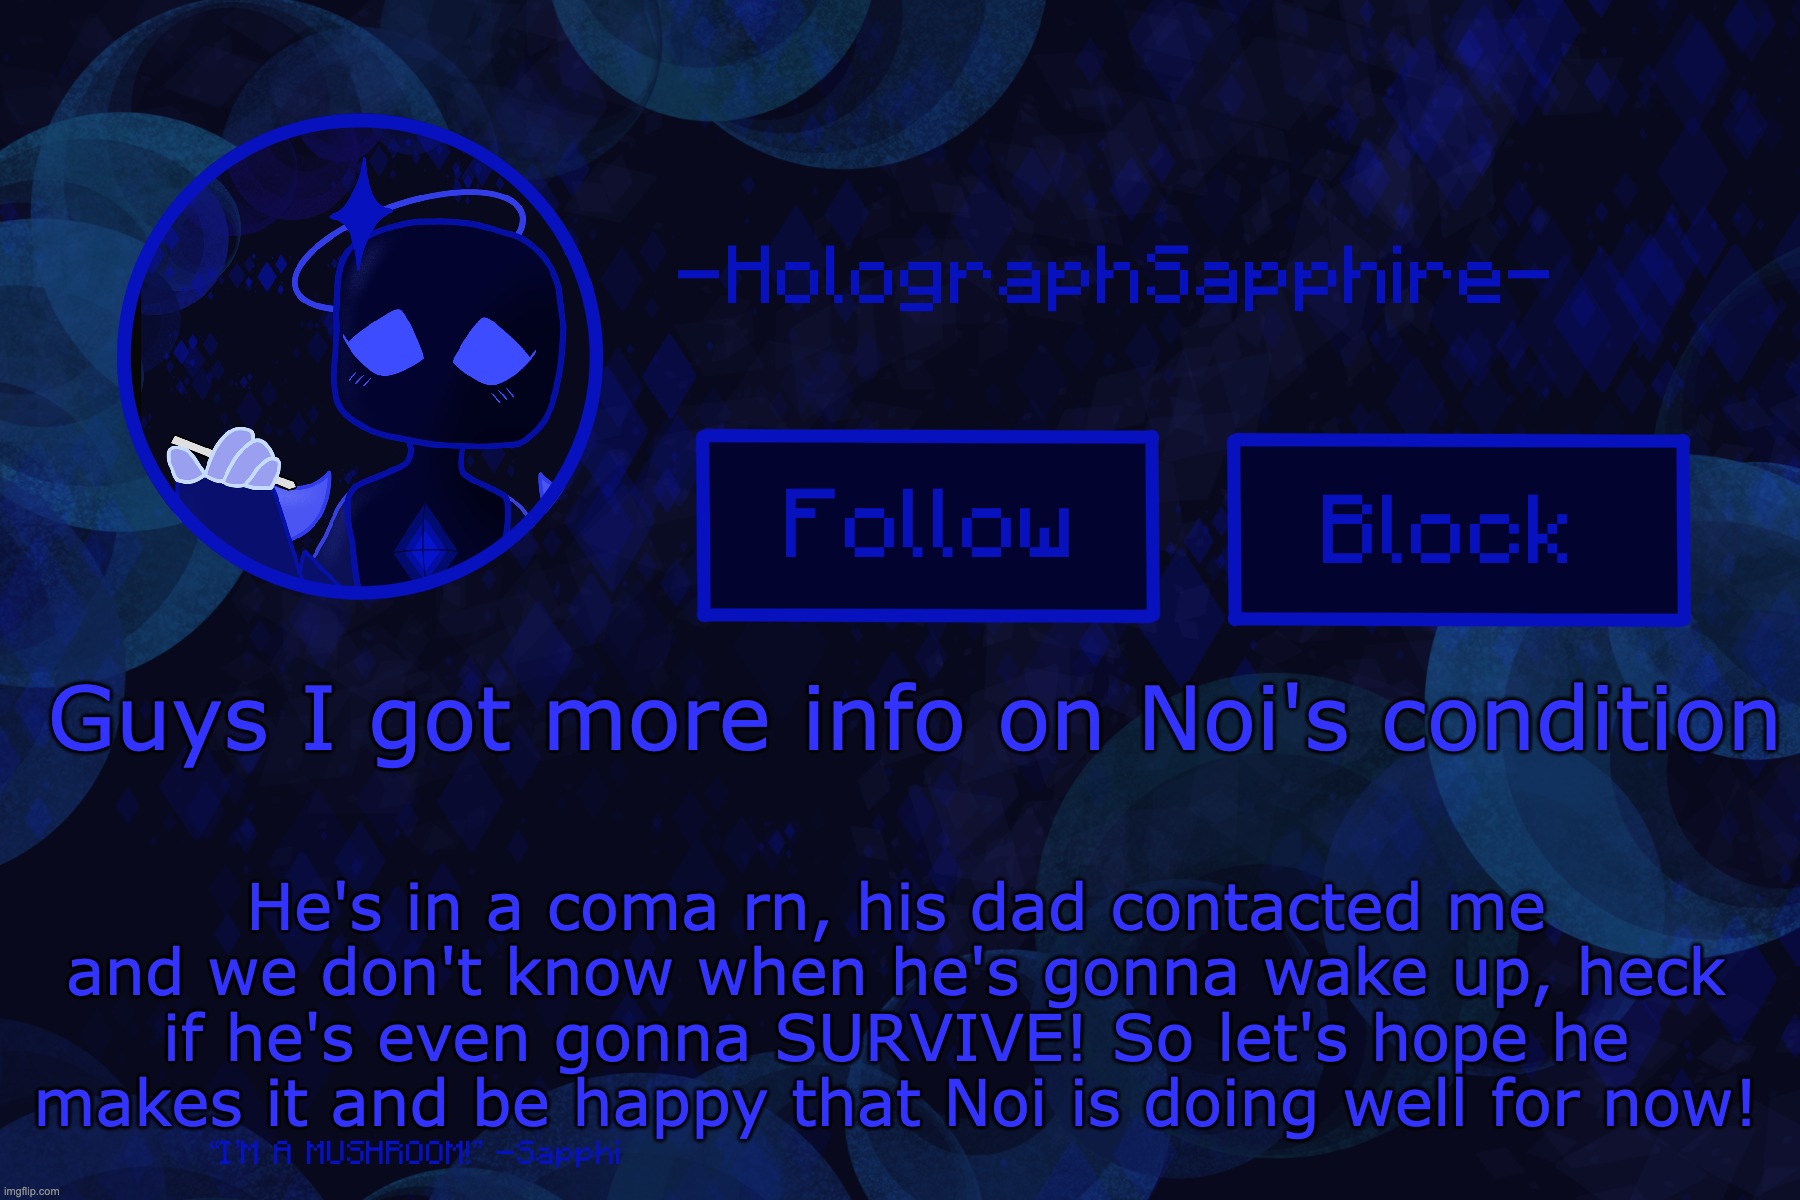 In the meantime let's all give Noi some positive messages for him to wake up to! | He's in a coma rn, his dad contacted me and we don't know when he's gonna wake up, heck if he's even gonna SURVIVE! So let's hope he makes it and be happy that Noi is doing well for now! Guys I got more info on Noi's condition | image tagged in -holographsapphire- s announcement template | made w/ Imgflip meme maker